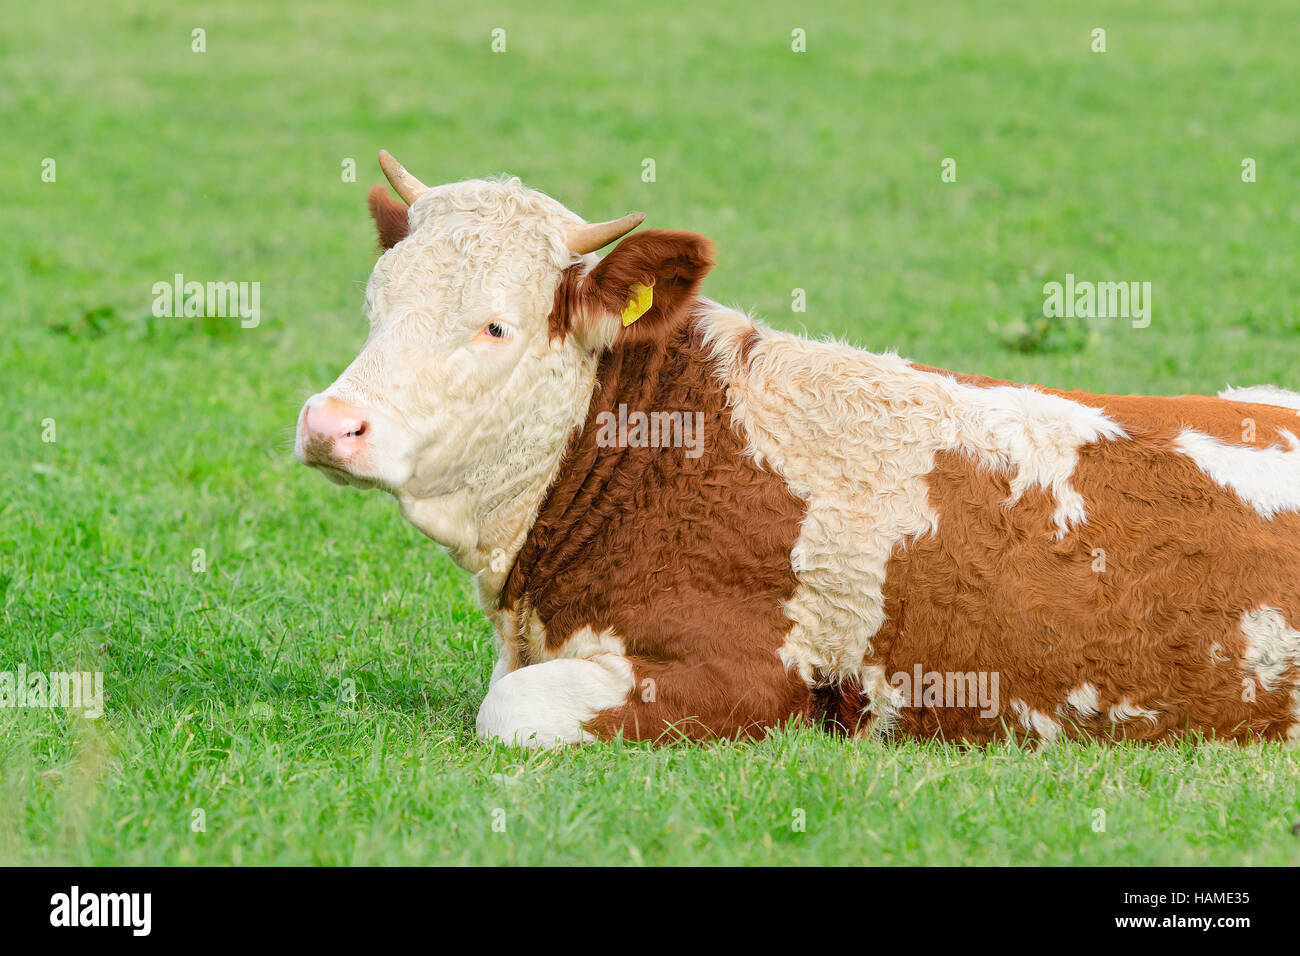 Young cow of Hereford breed lying on sunny Alpine pasture with natural fresh grass Stock Photo